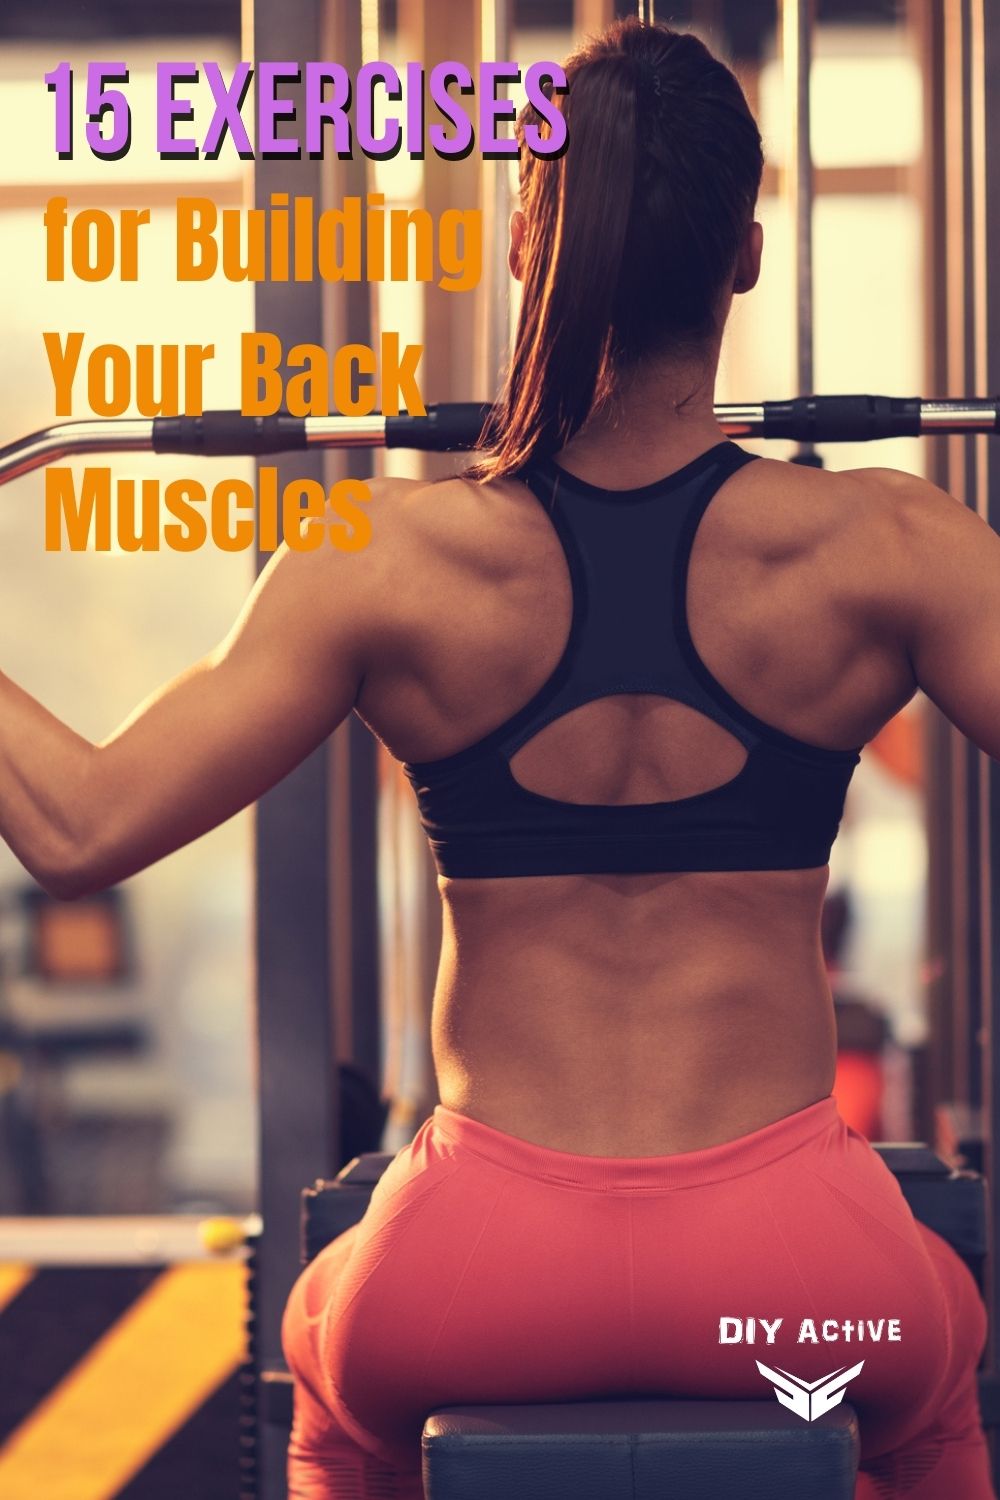 15 Exercises for Building Your Back Muscles